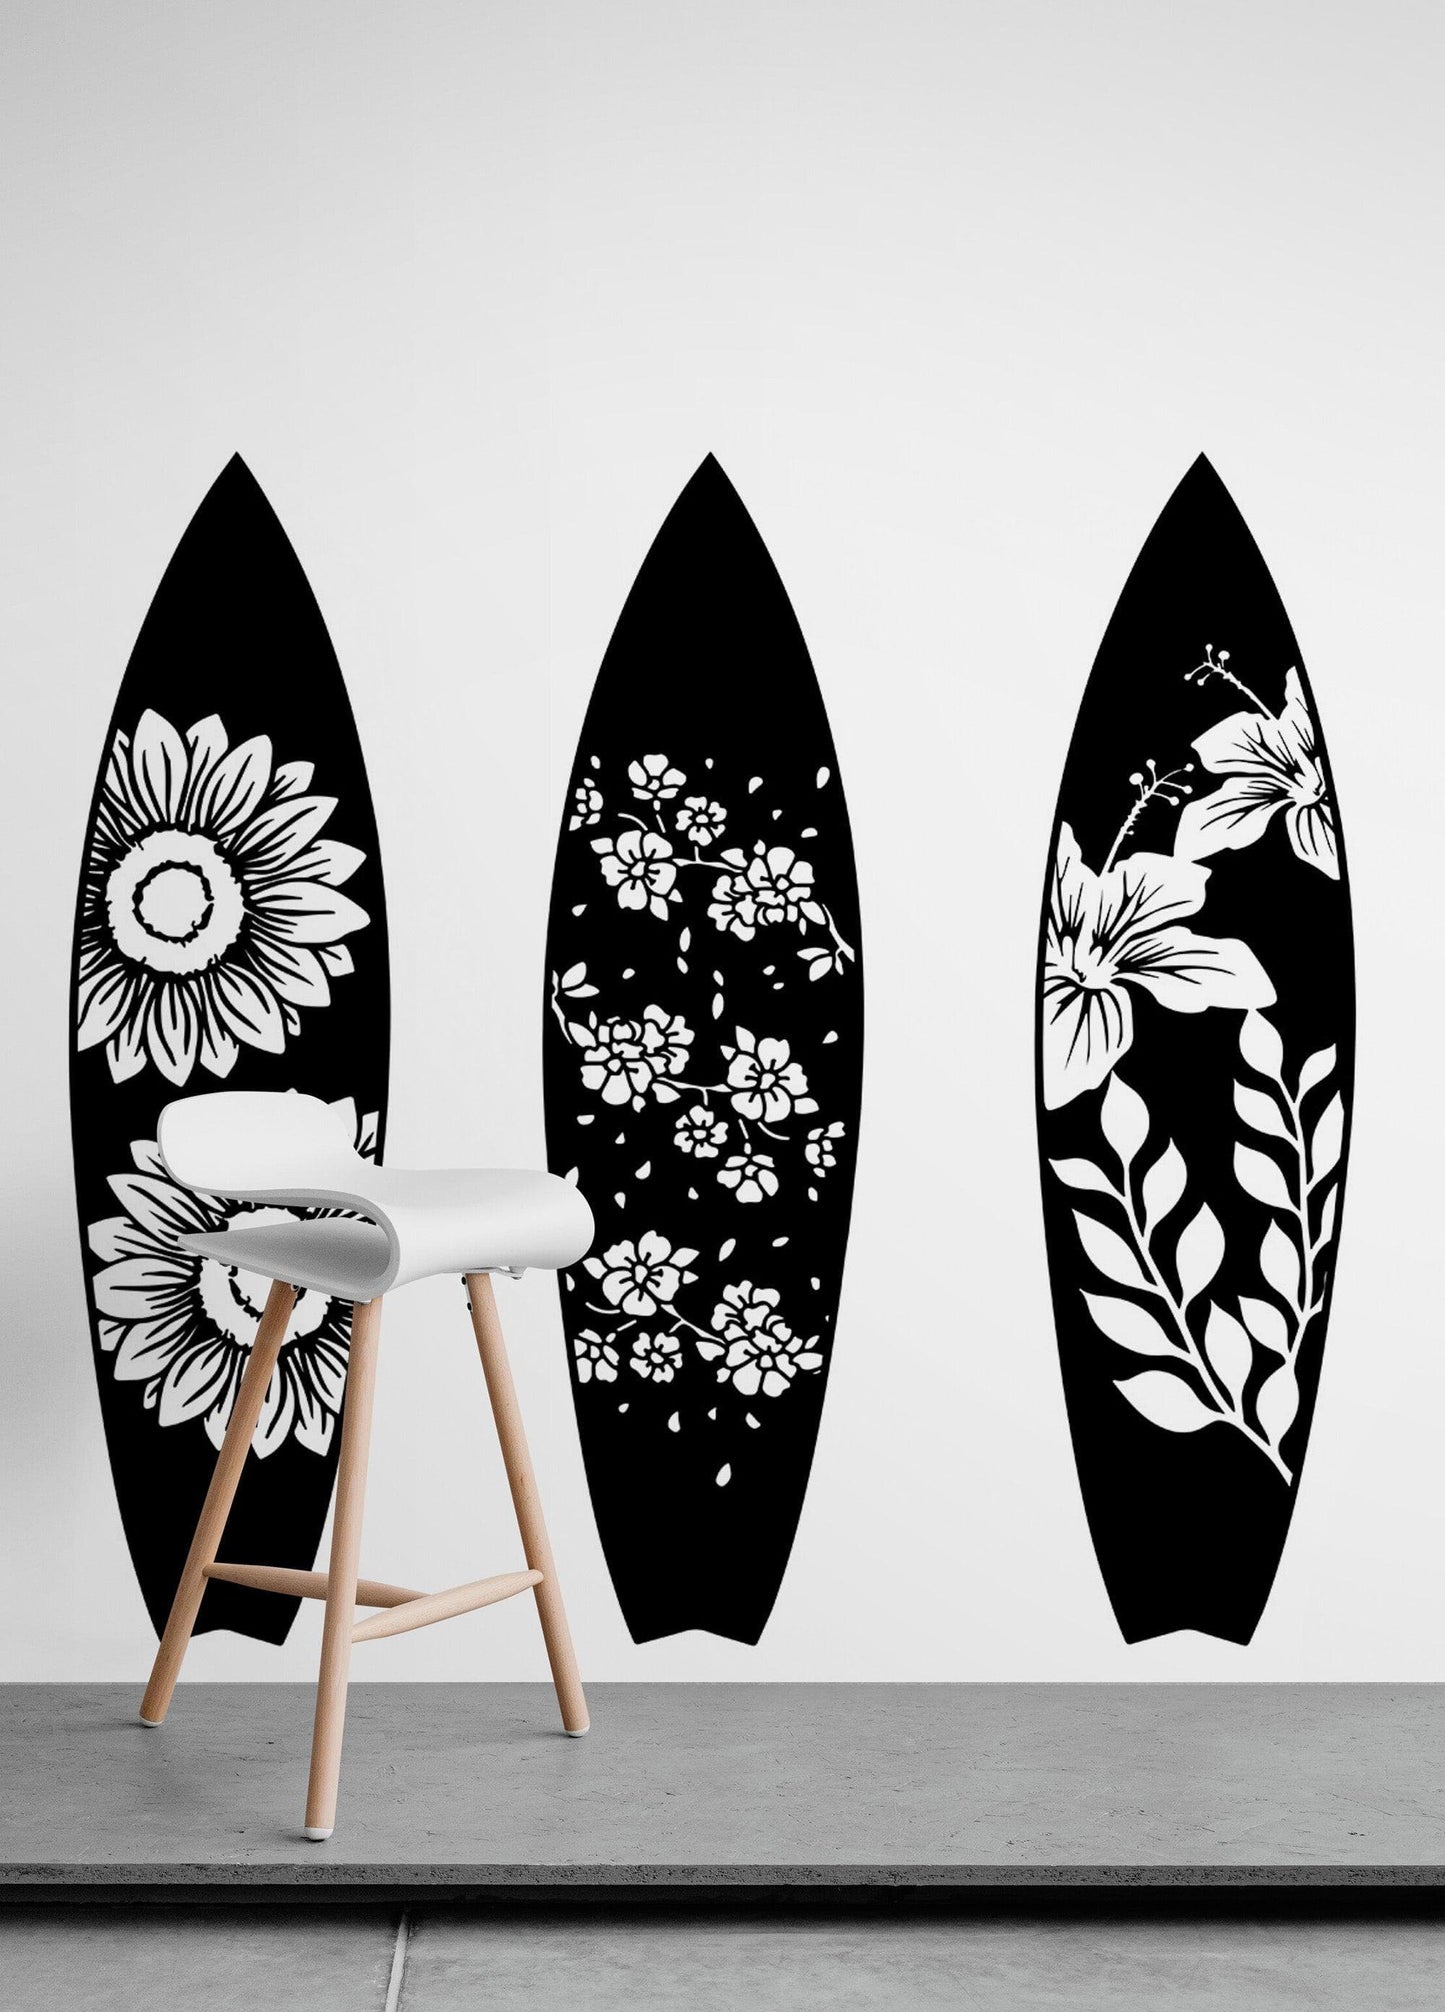 Surfboards Wall Decal Sticker. Floral Pattern Surfboards. #6682